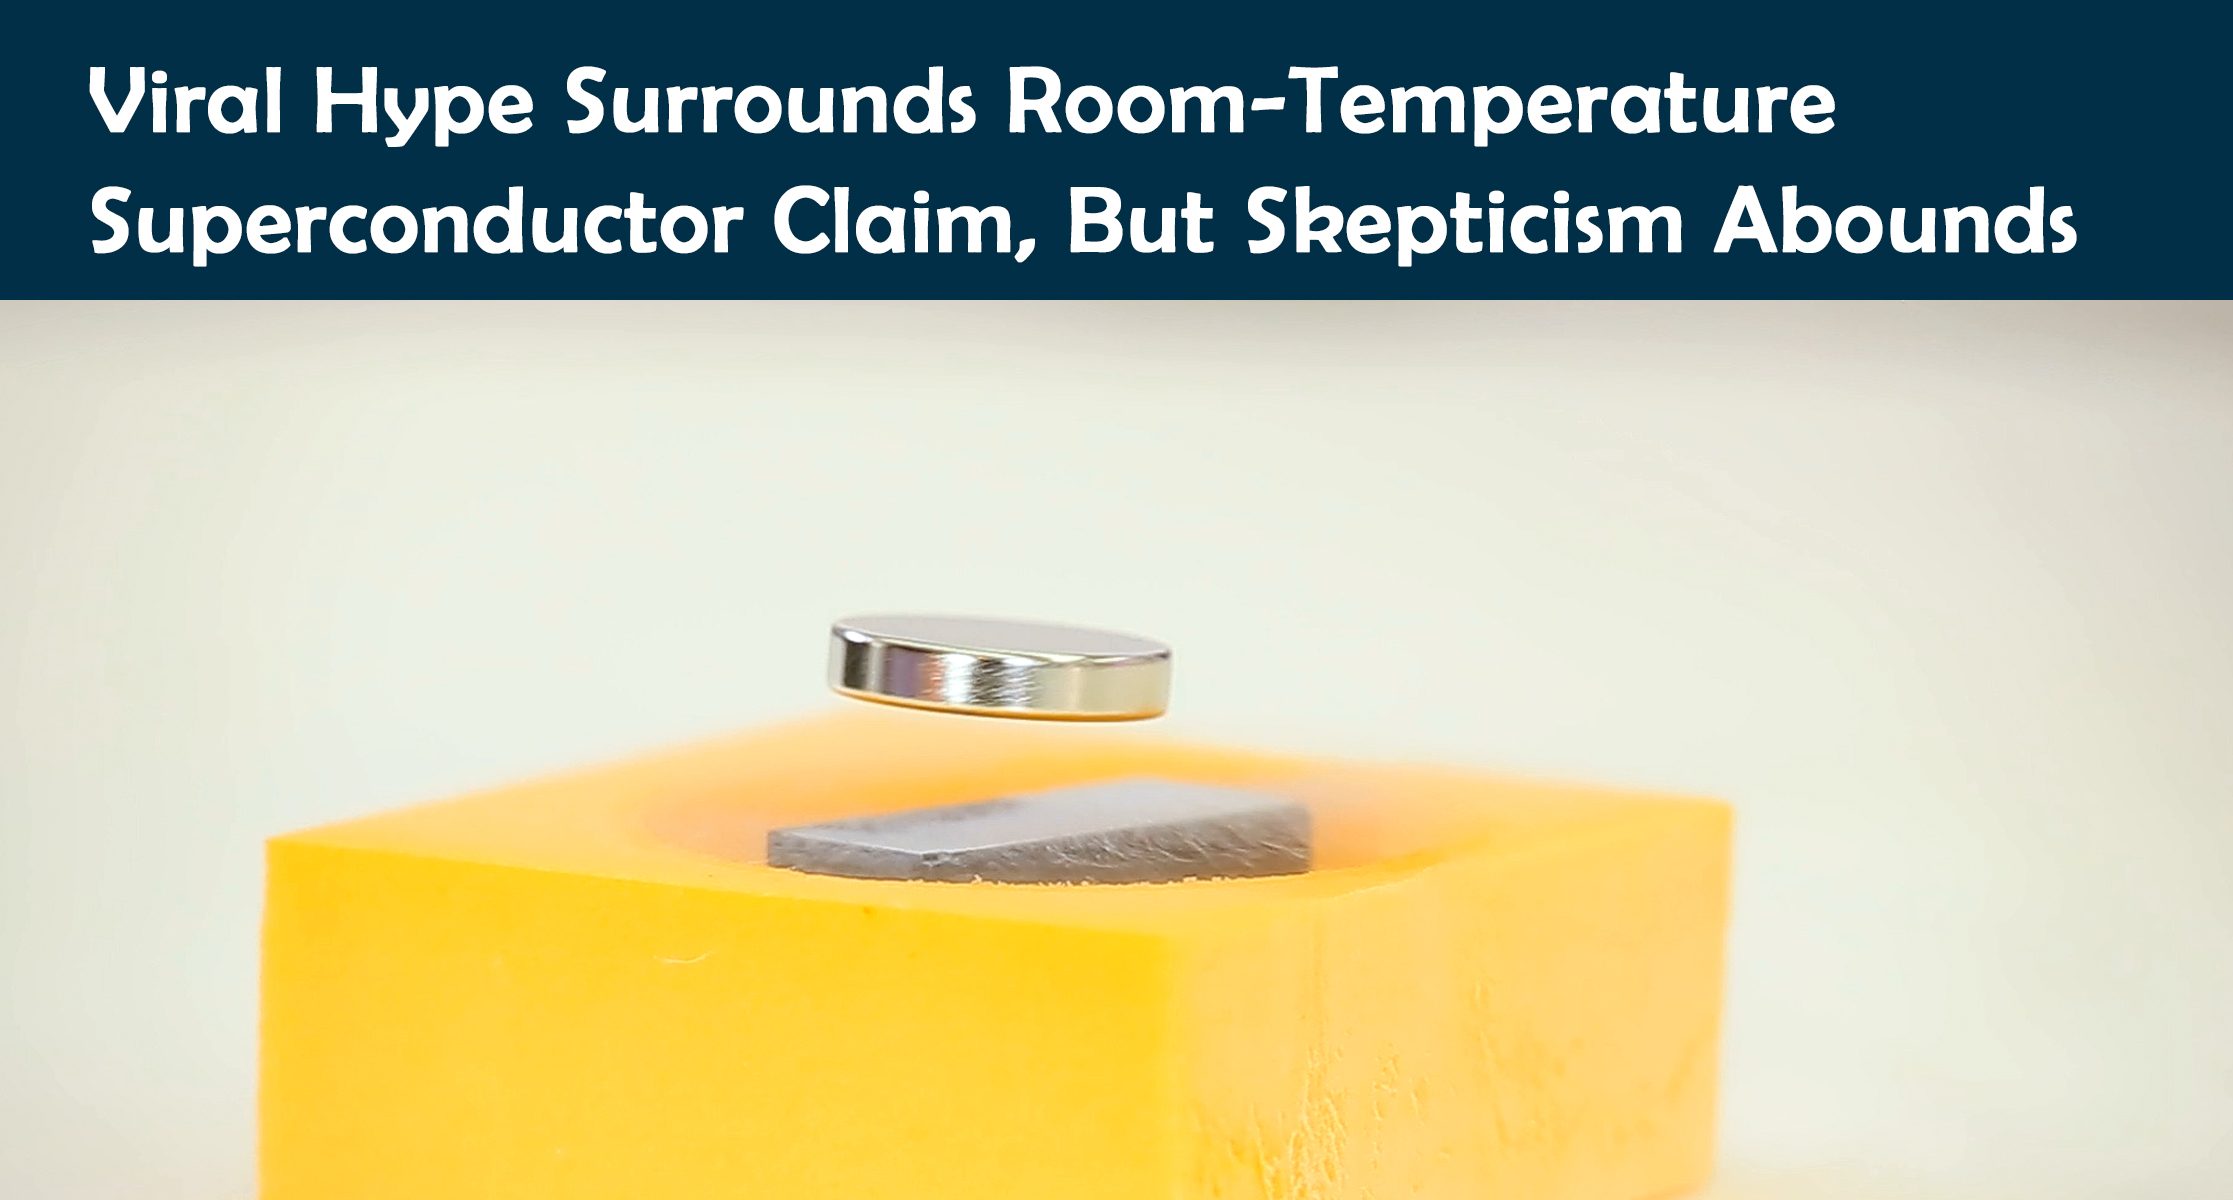 Viral Hype Surrounds Room-Temperature Superconductor Claim, But Skepticism Abounds